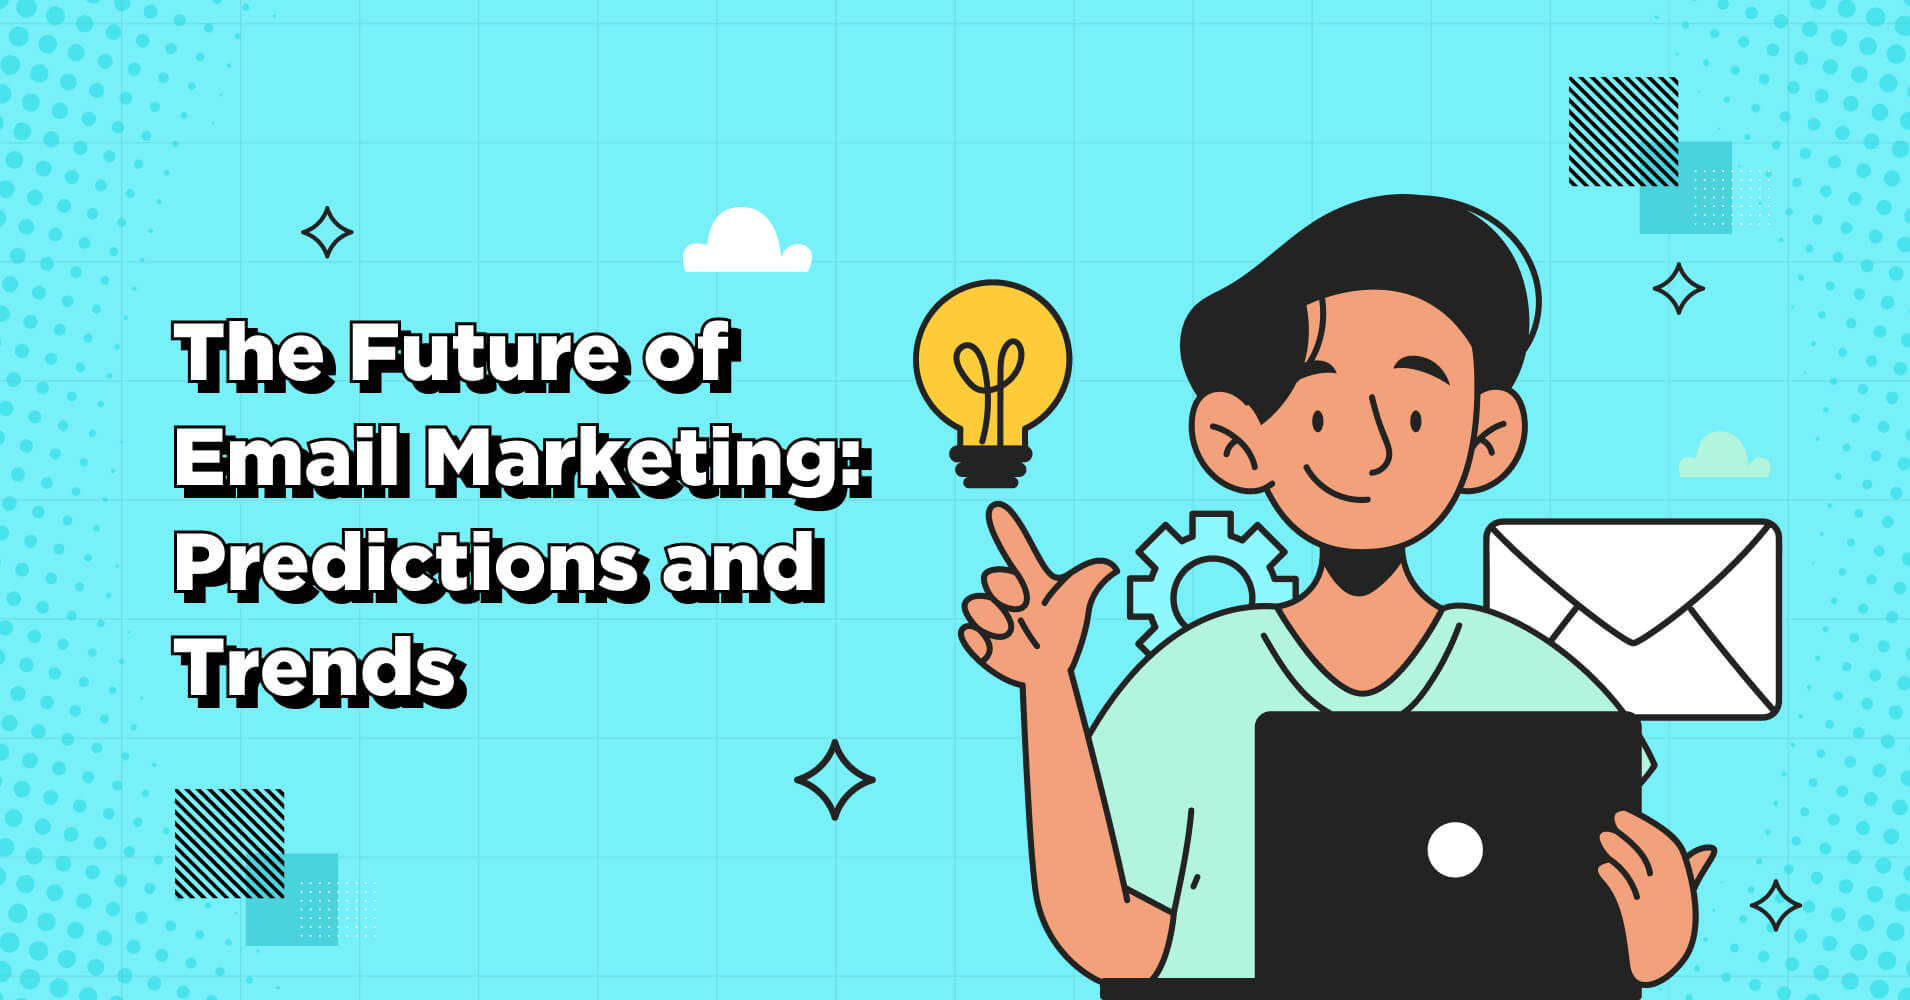 The Future of Email Marketing: Predictions and Trends